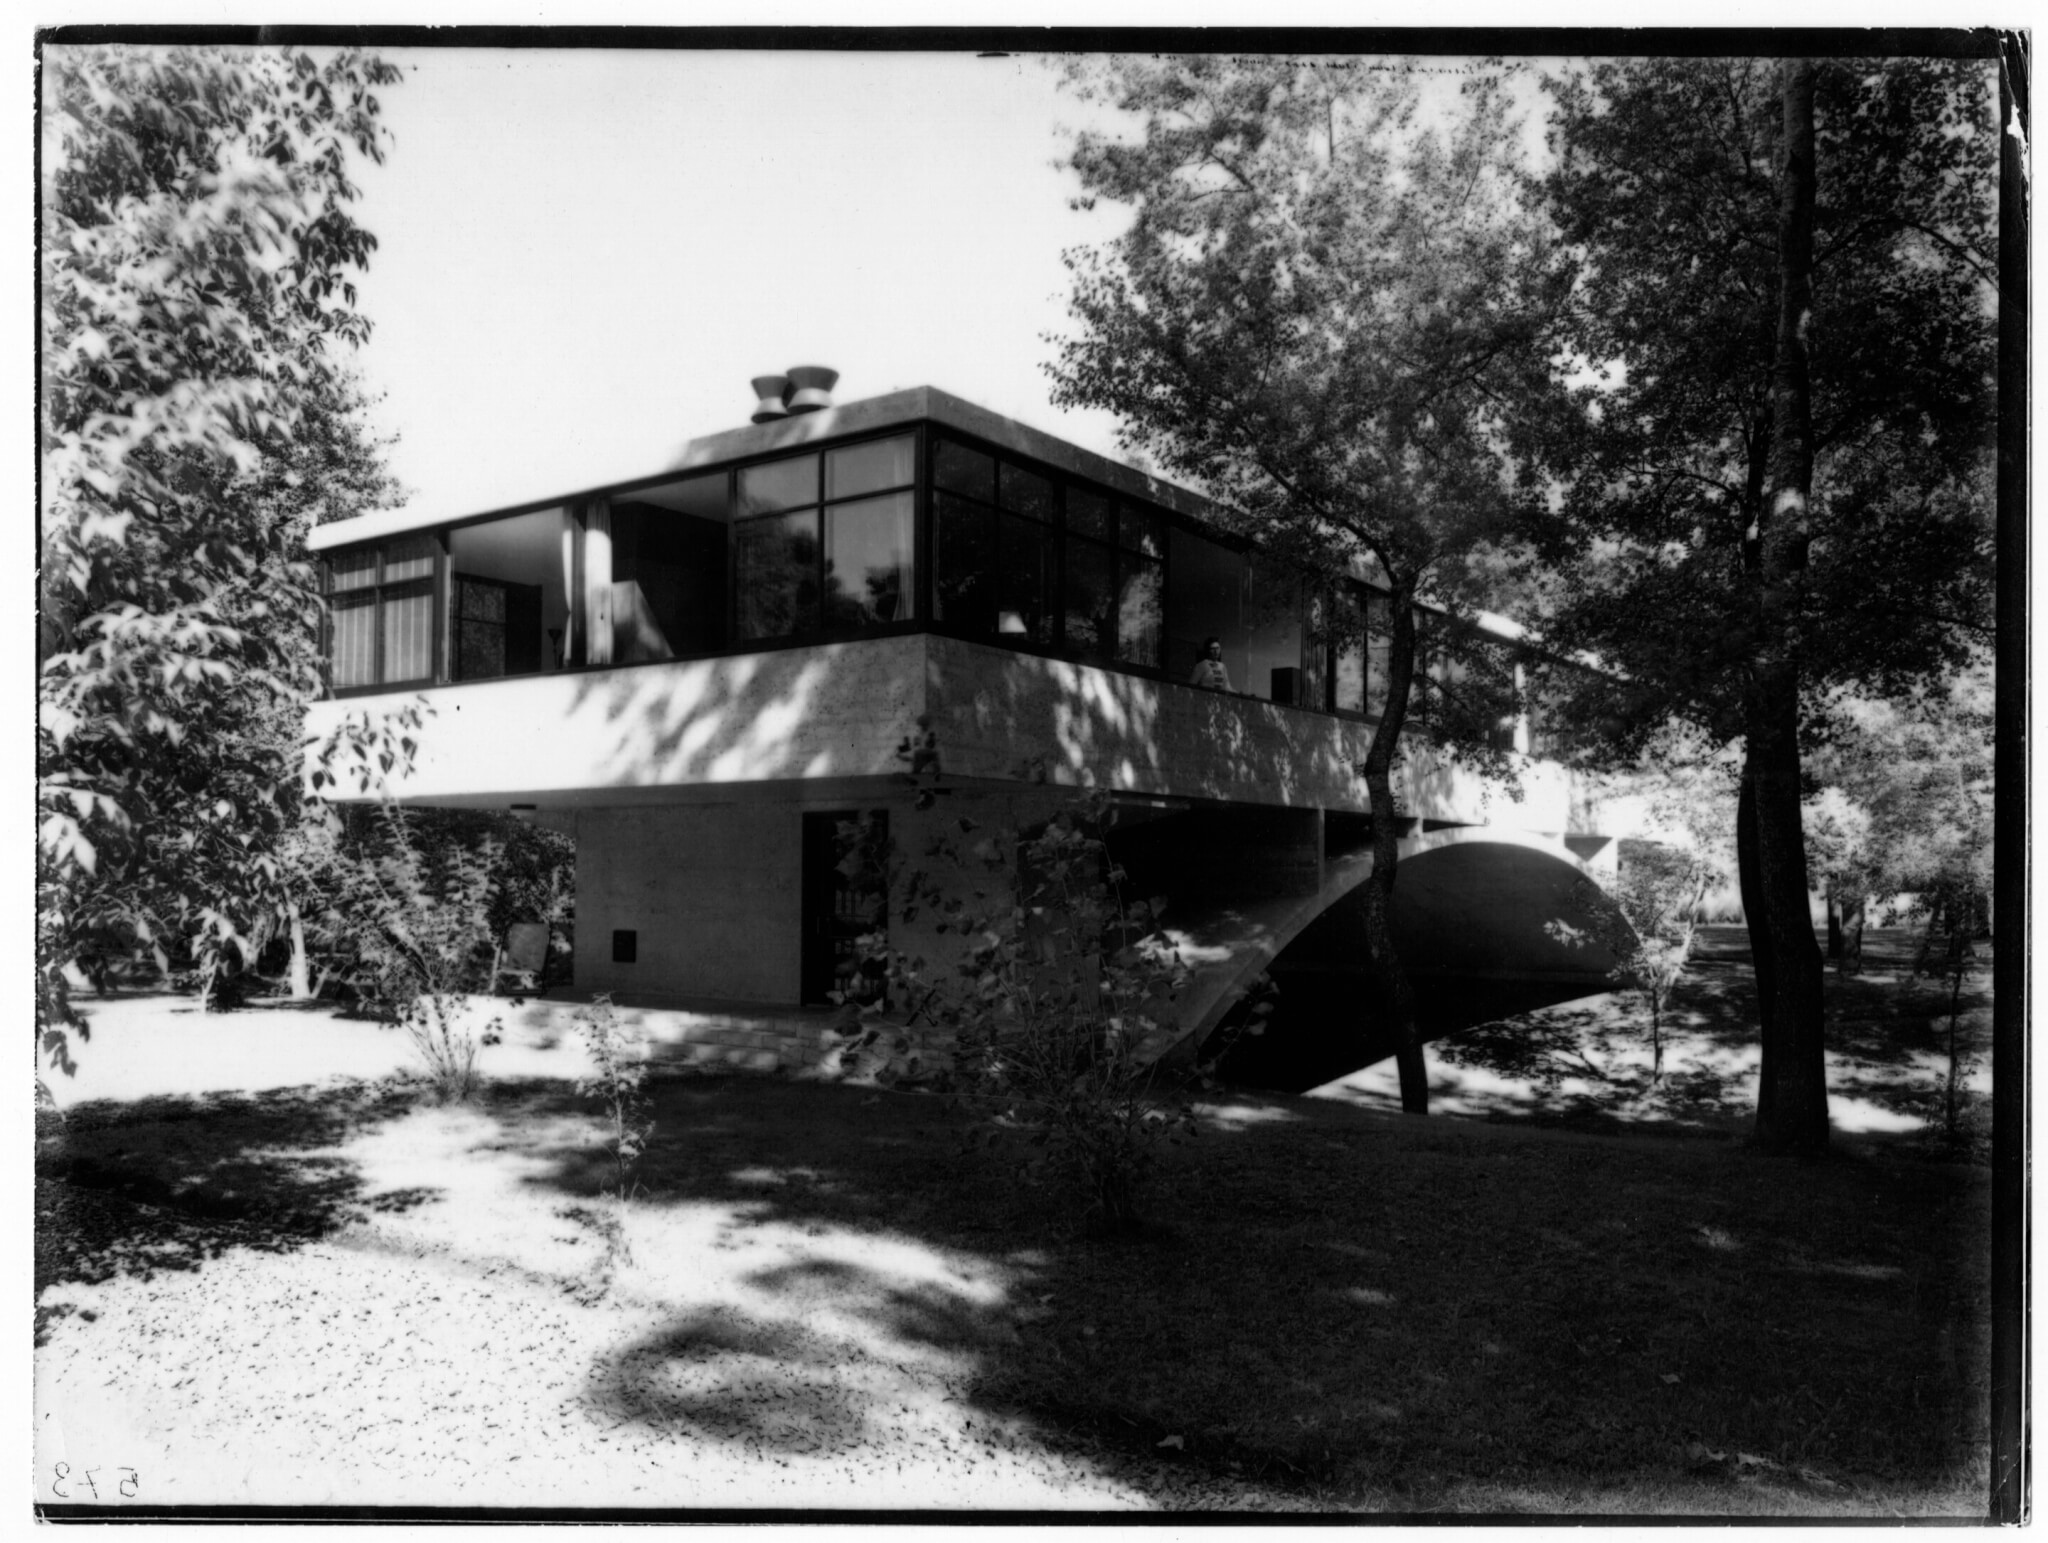 Black and white image of a house over a stream.